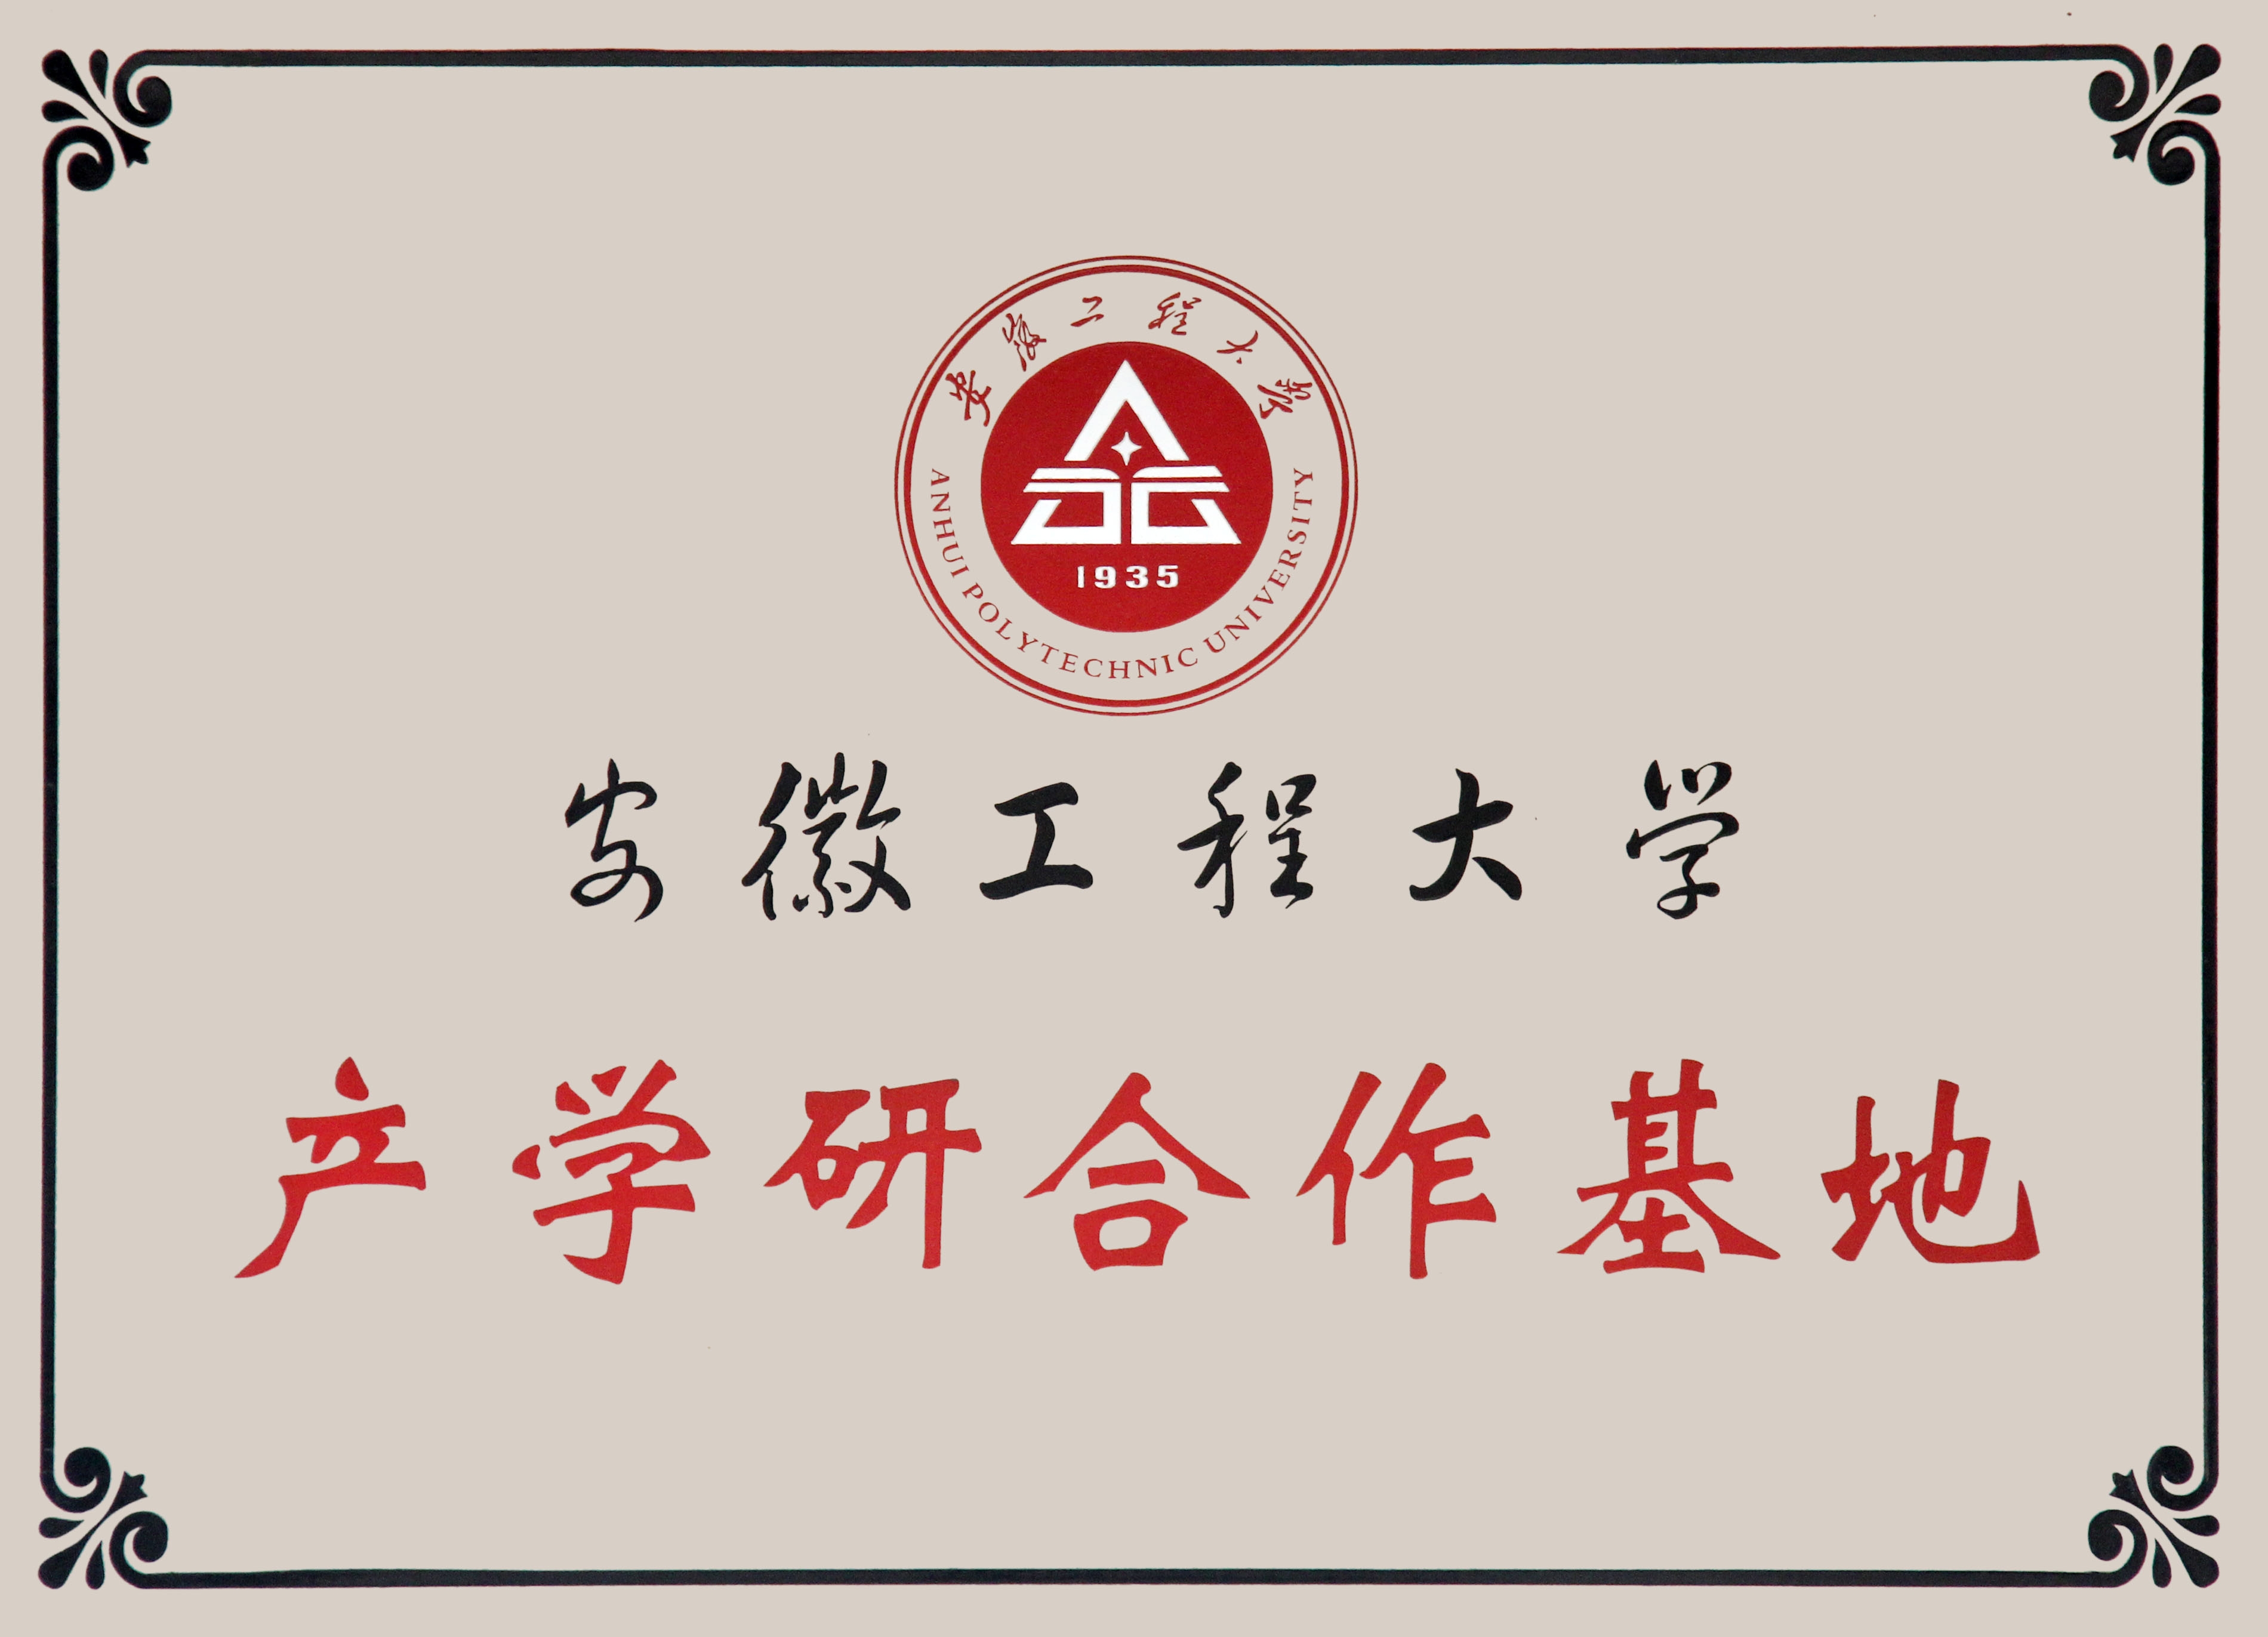 Anhui University of Technology Industry-University-Research Cooperation Base